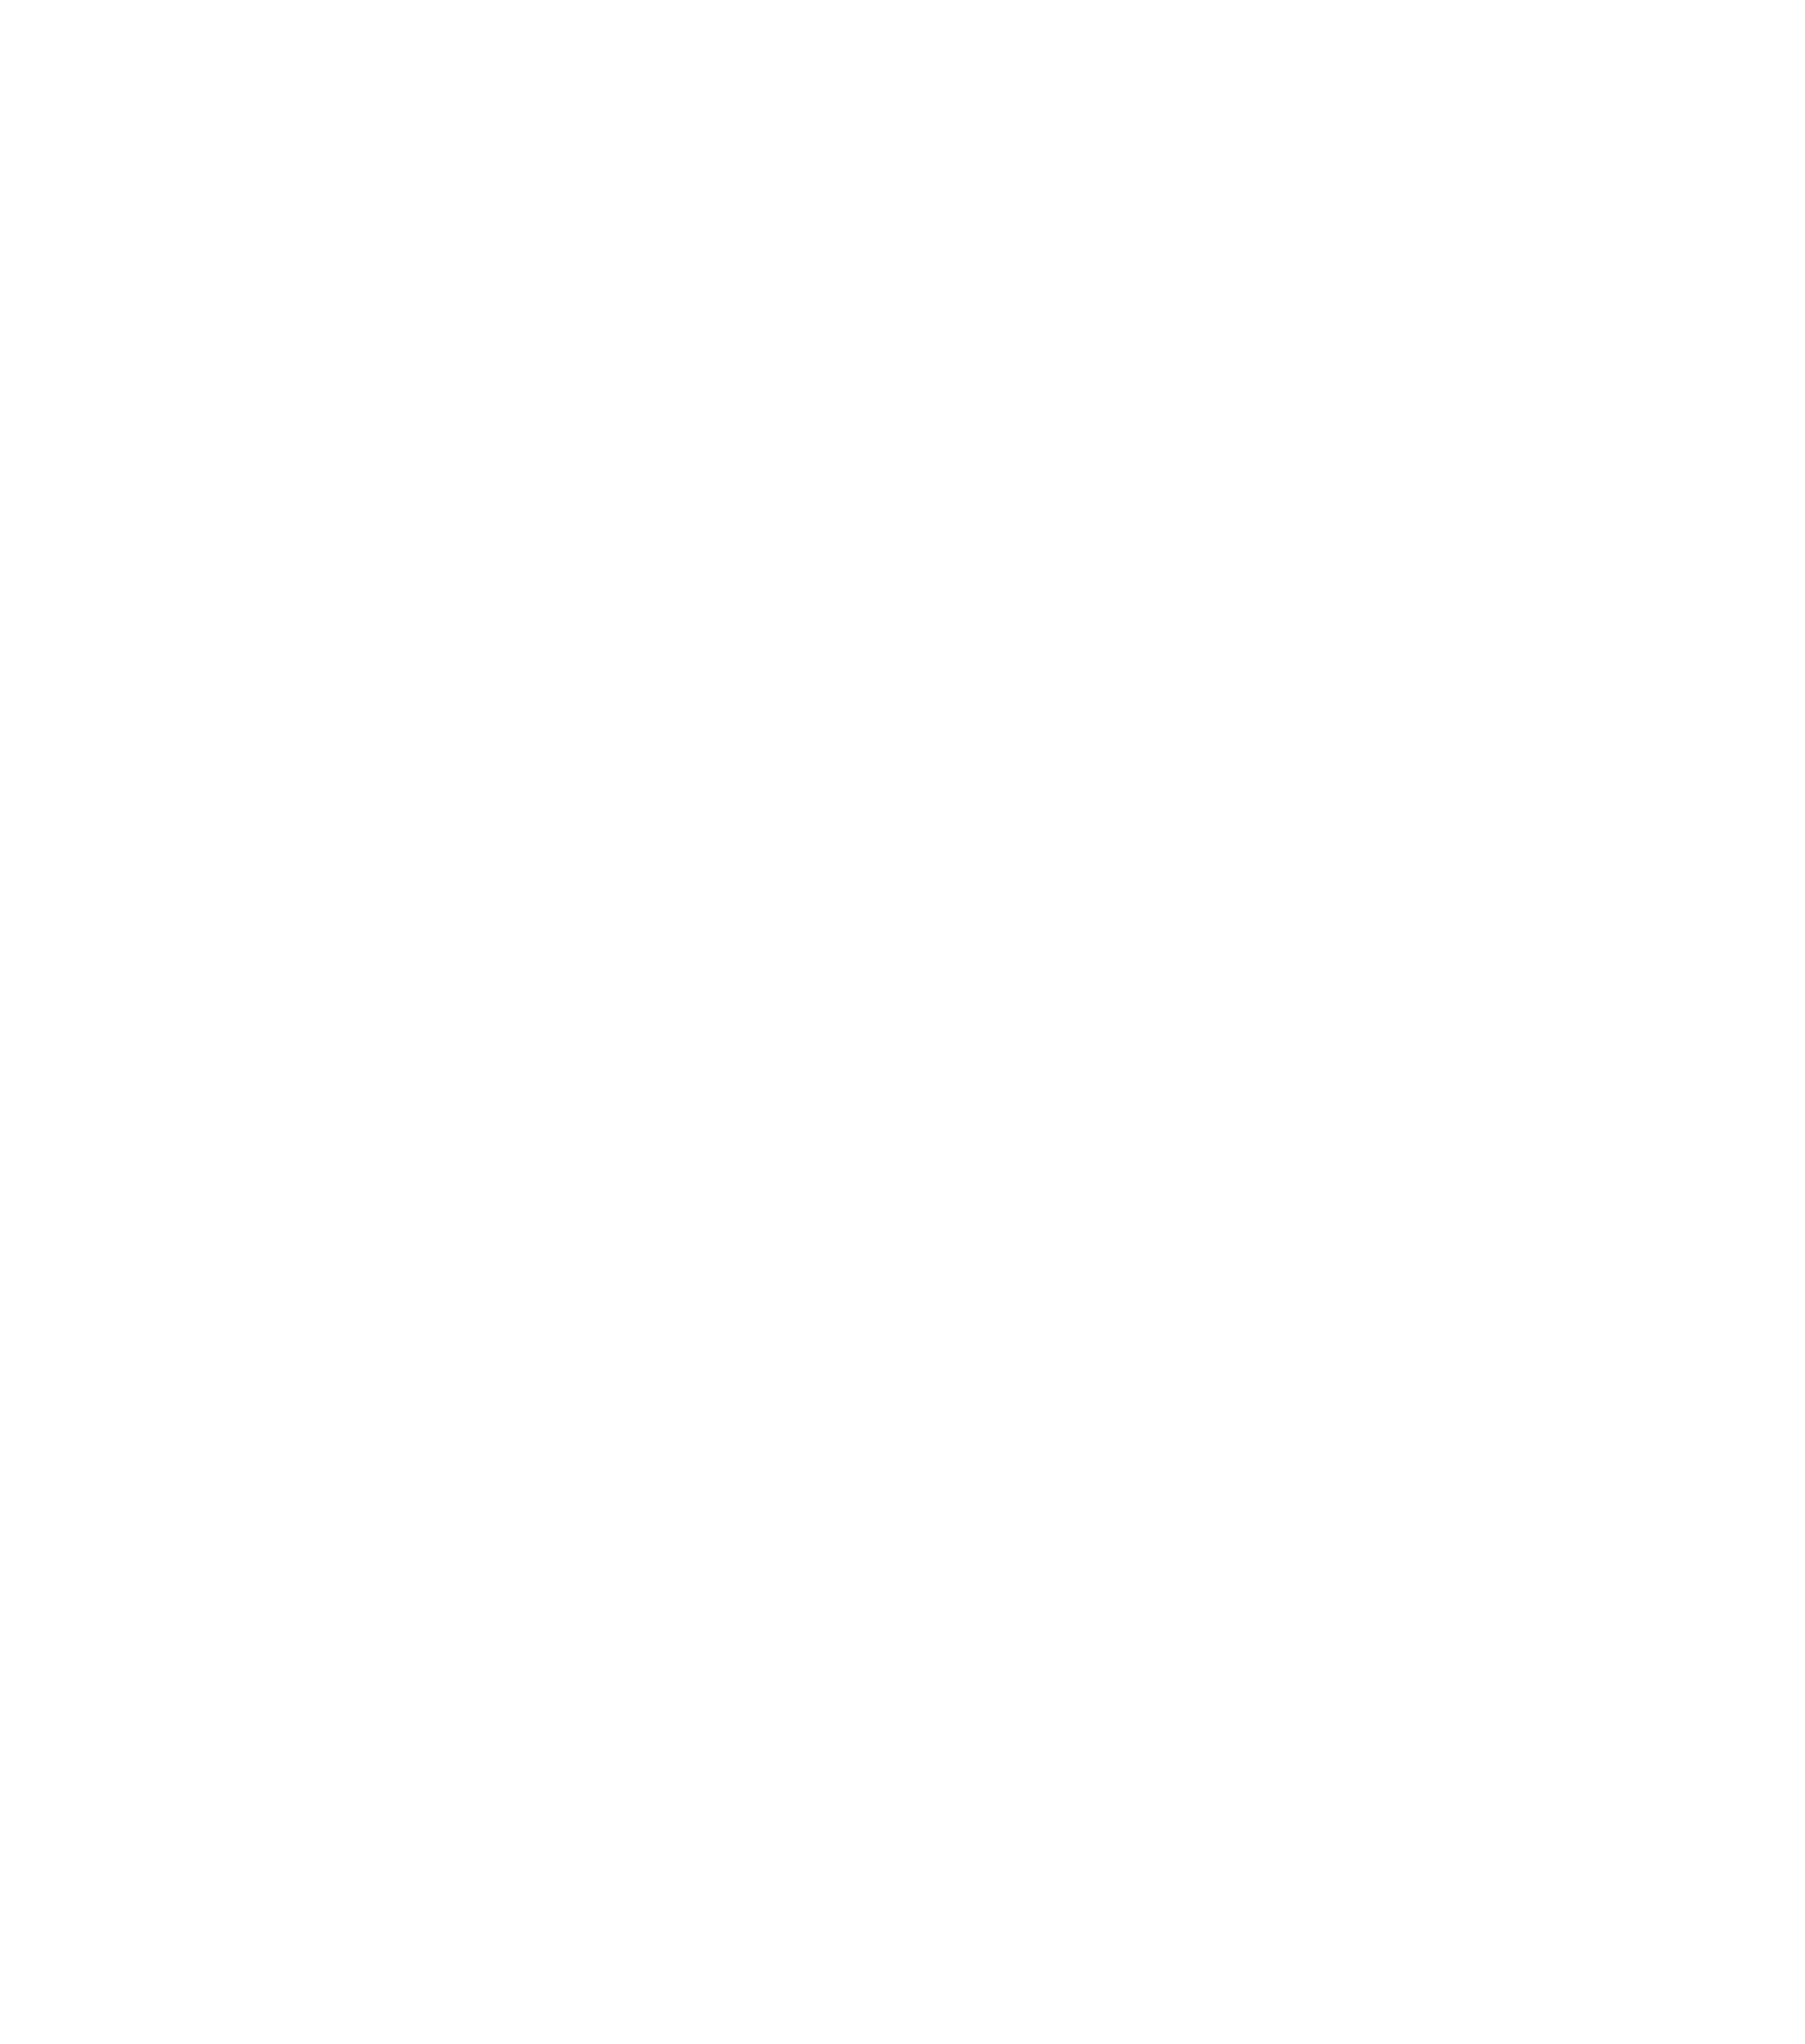 Picture of the HTML logo.